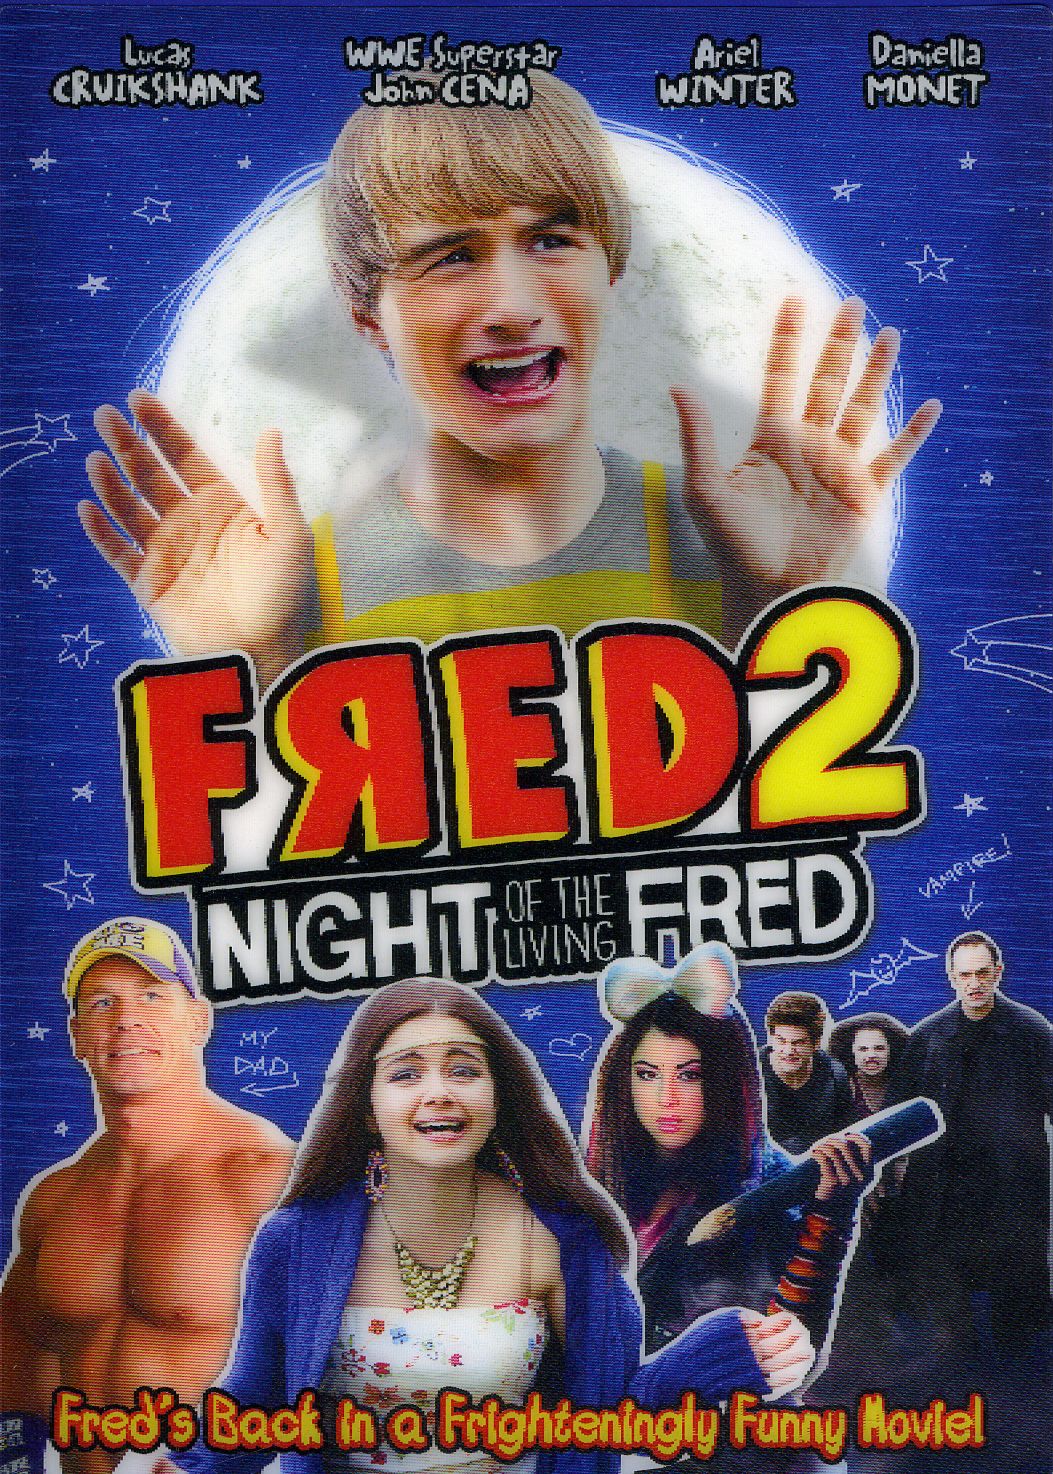 FRED 2: NIGHT OF THE LIVING FRED / (AC3 DOL LENT)